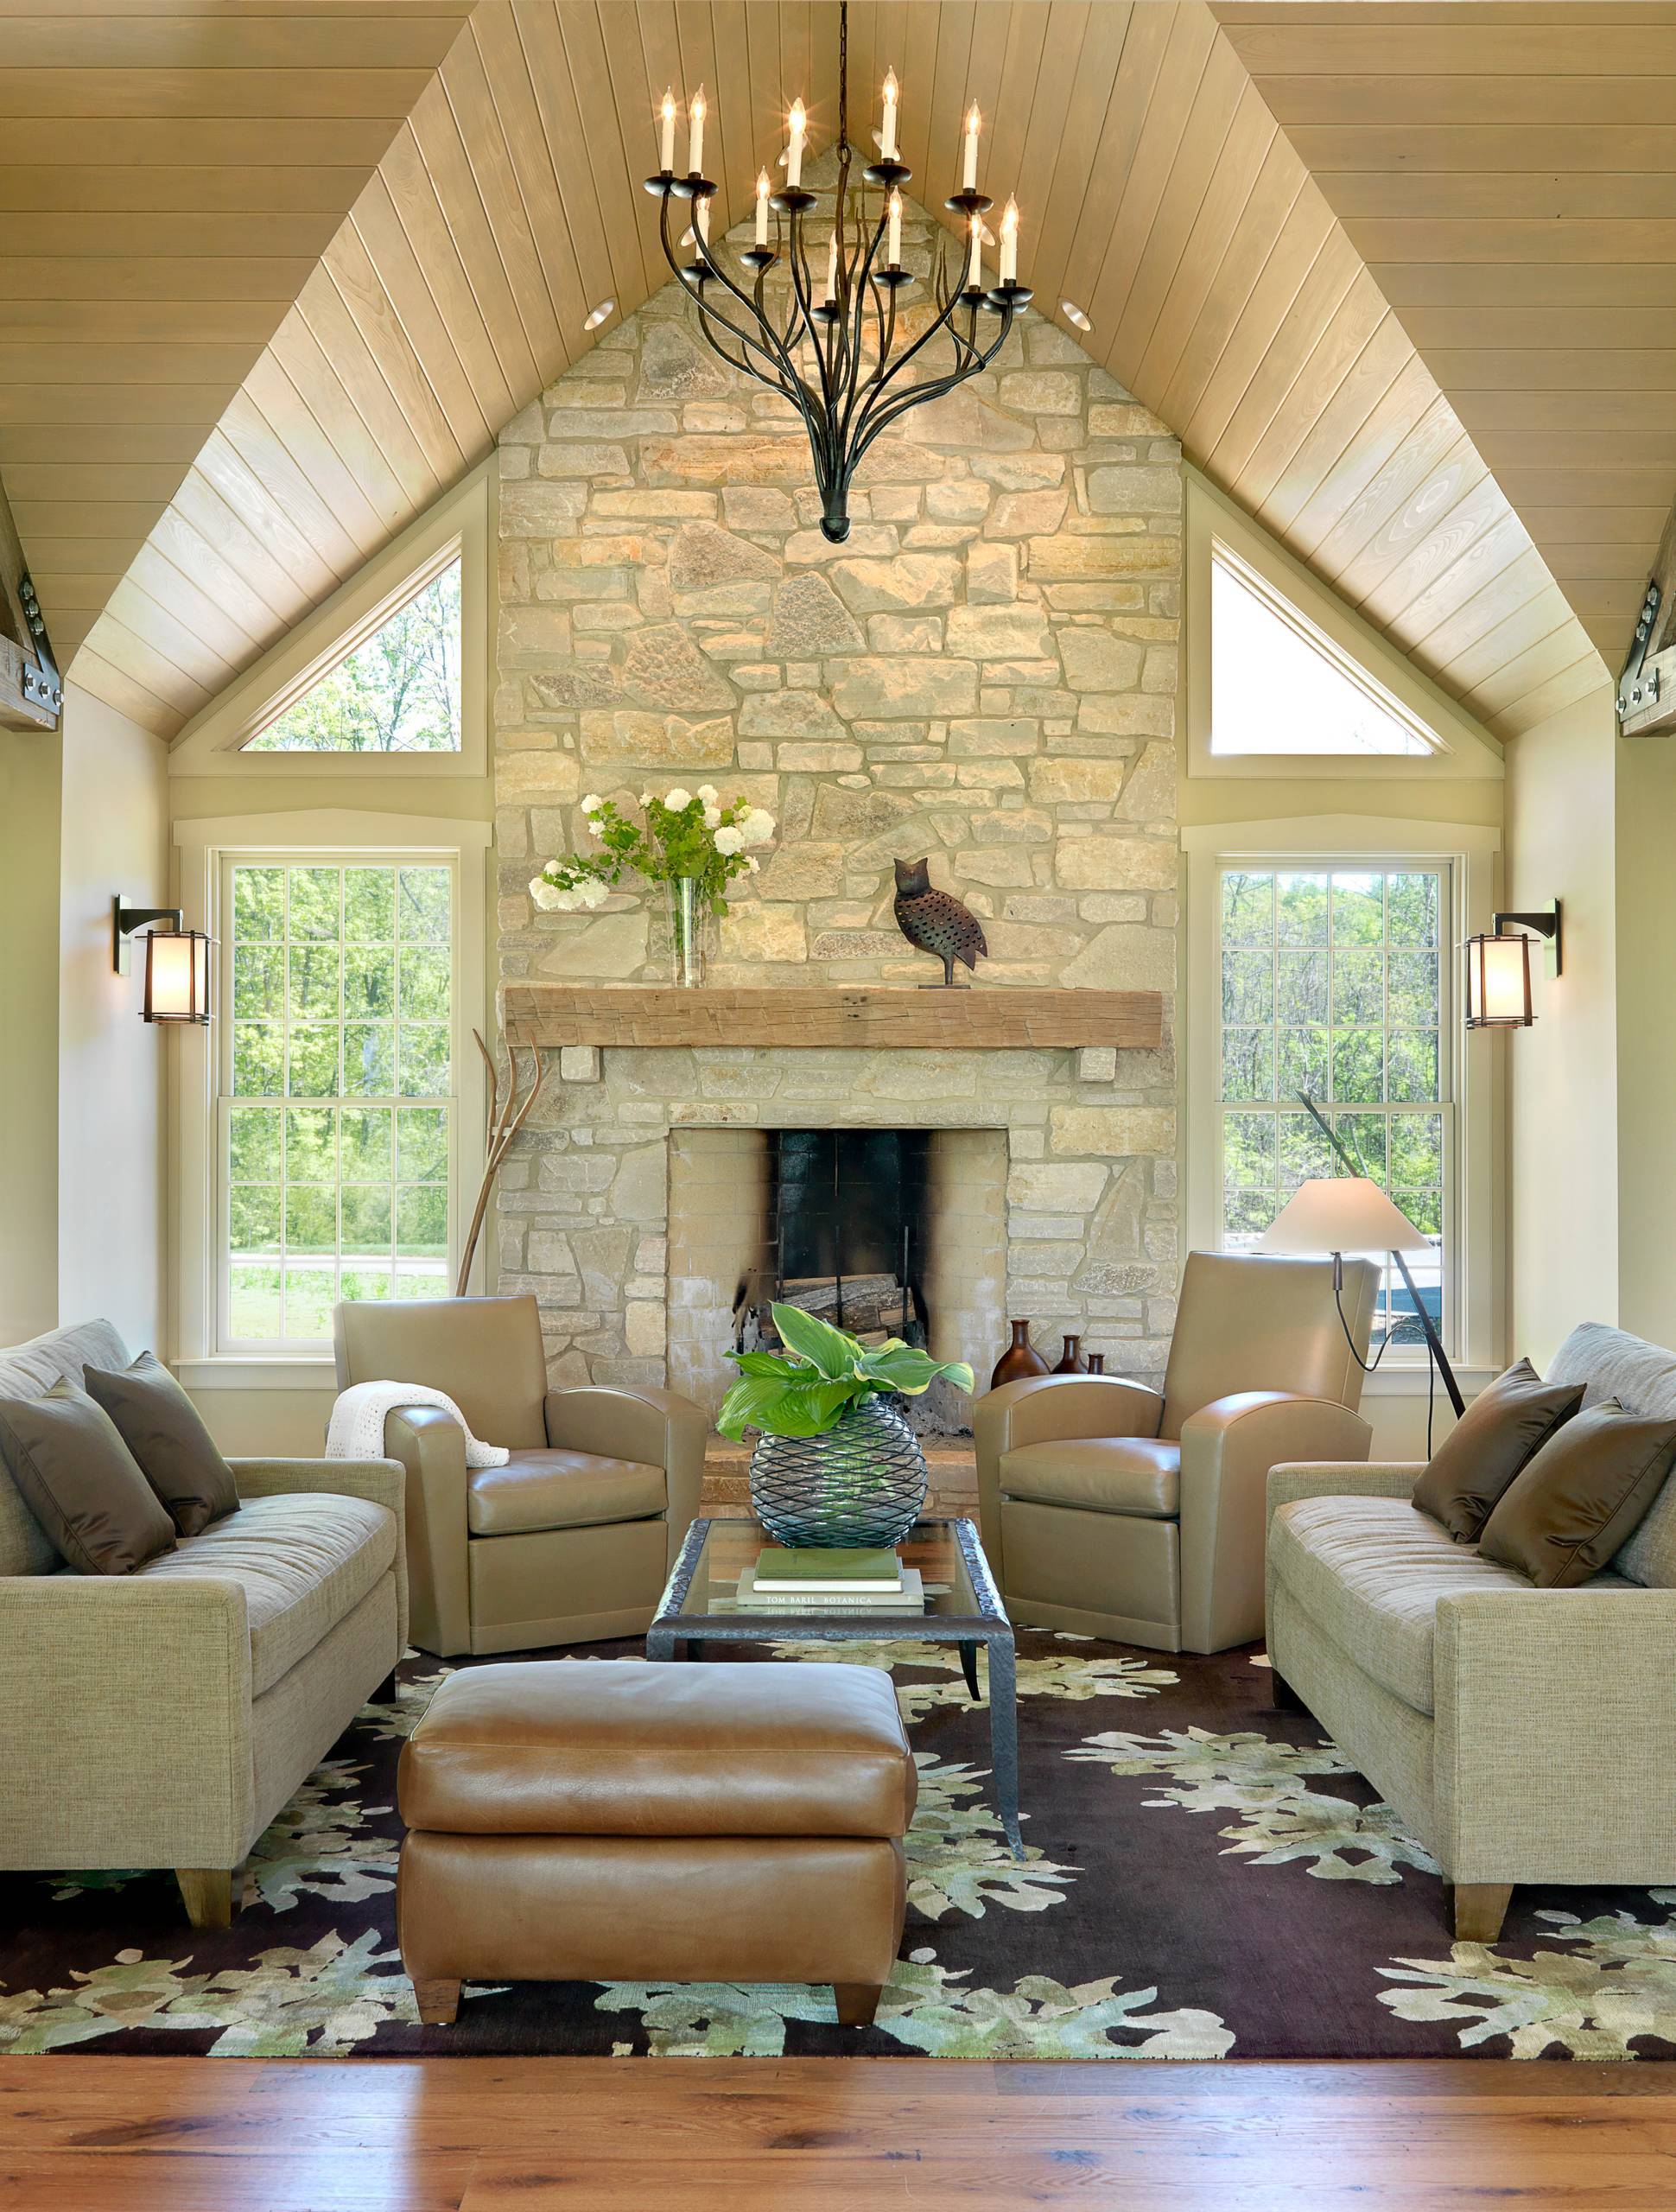 A stone fireplace will complement the stone exterior (from Houzz)